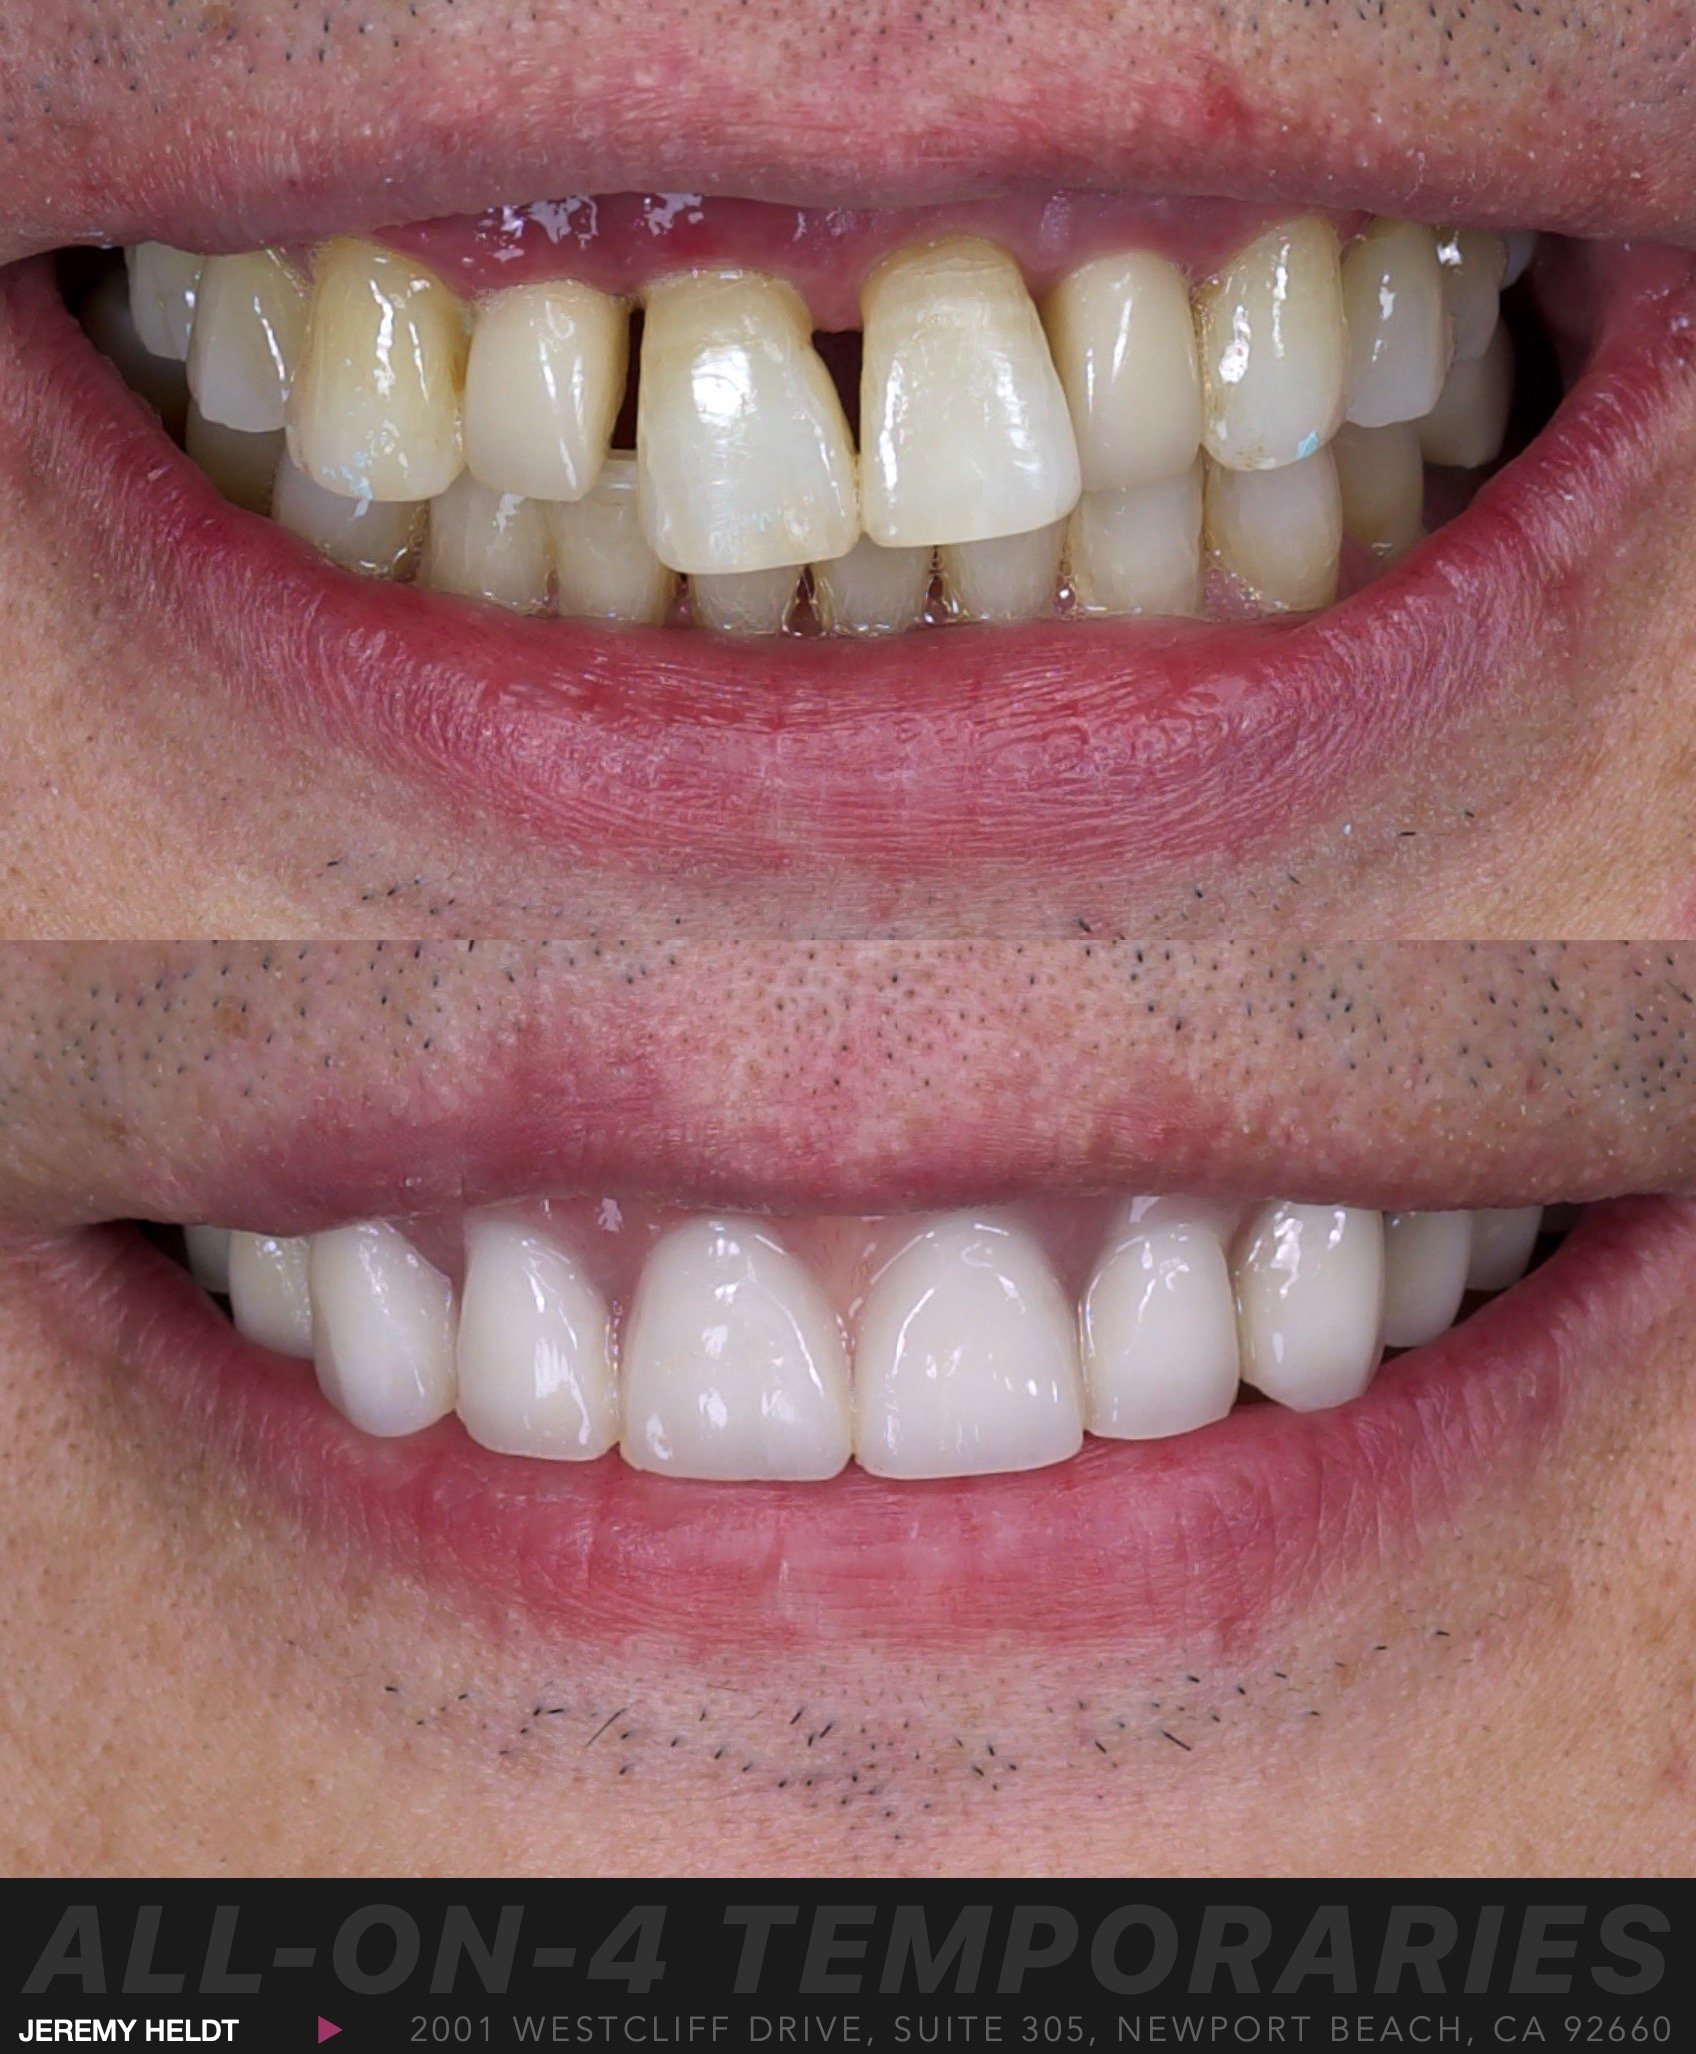 All-on-4 Dental Implants Newport Beach.  Implant-Supported Bridge.  All-on-X by Jeremy Heldt, DDS.